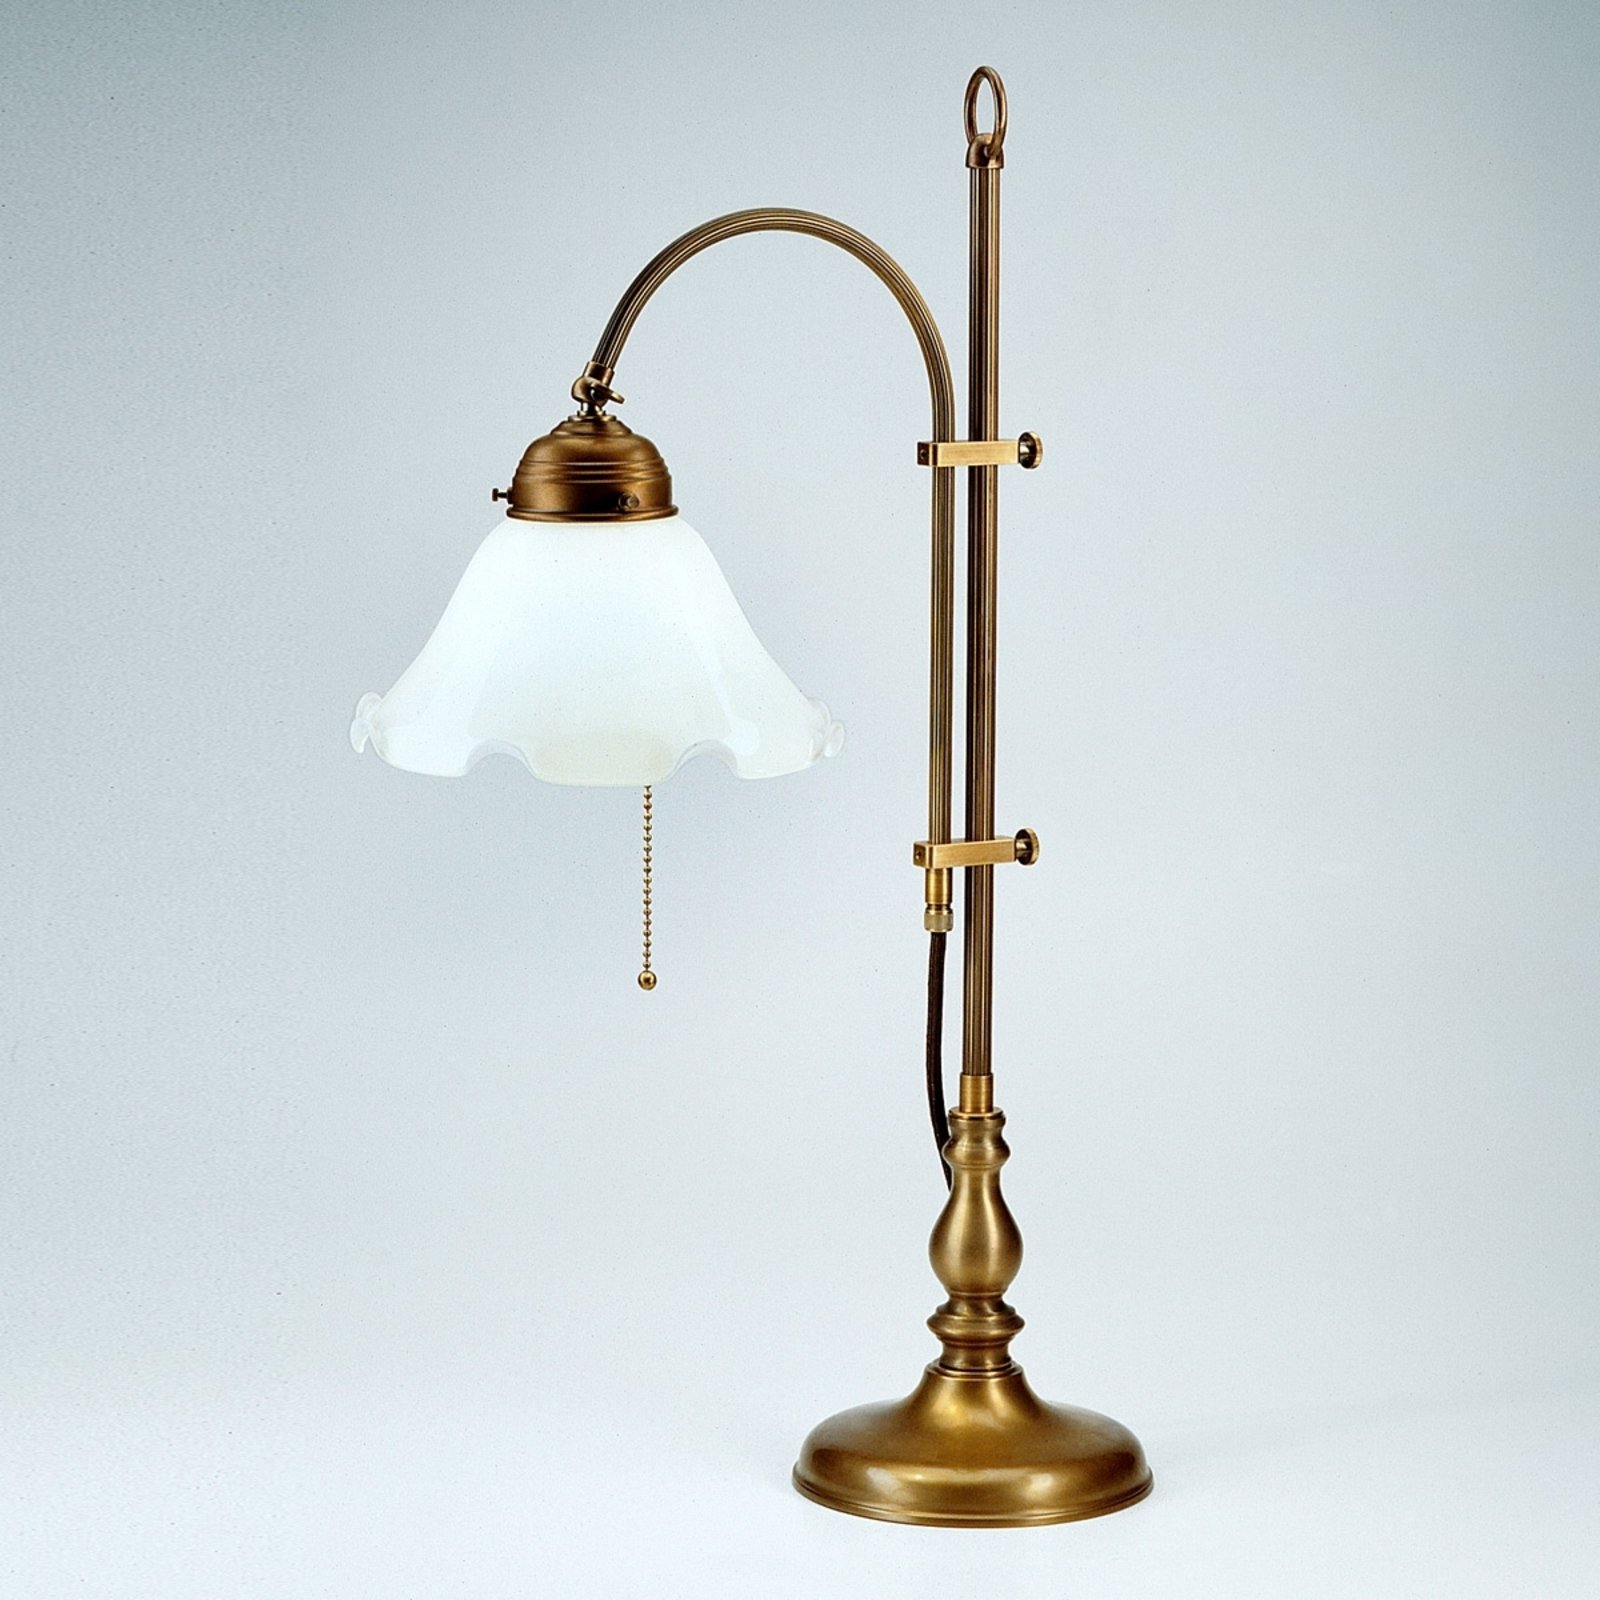 Ernst table lamp - practically adjustable